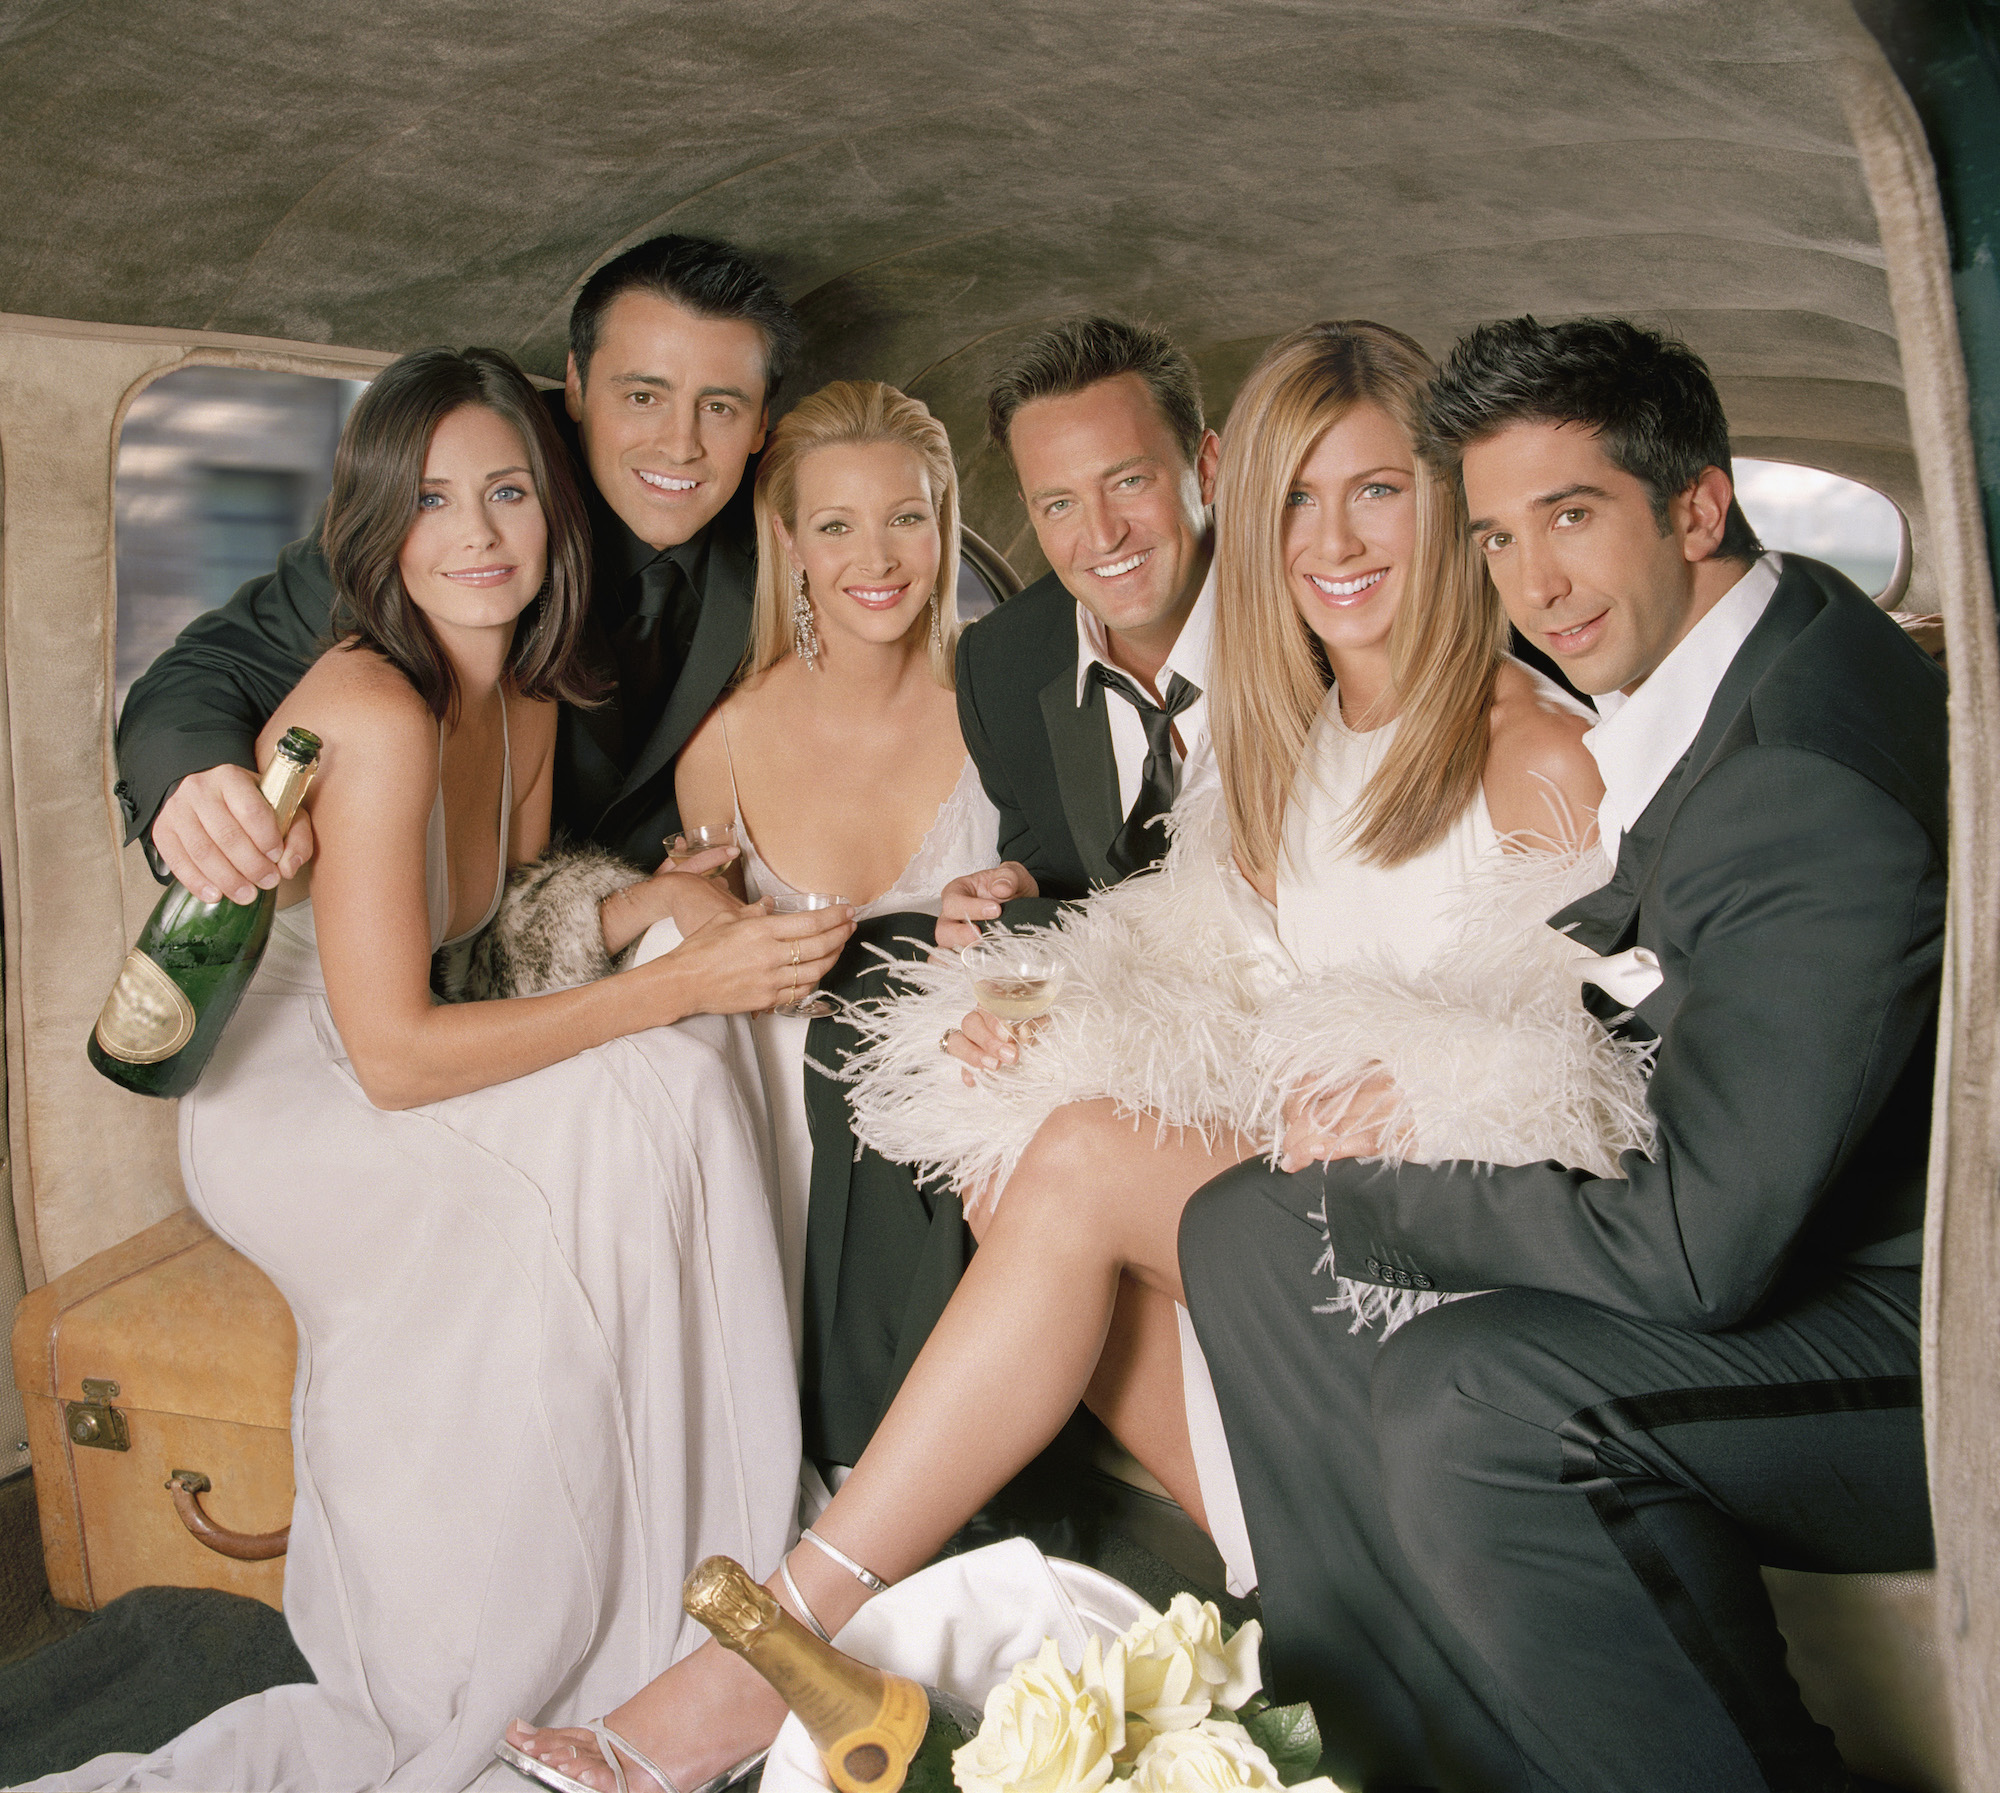 'Friends' cast together in car years before 'Friends' reunion